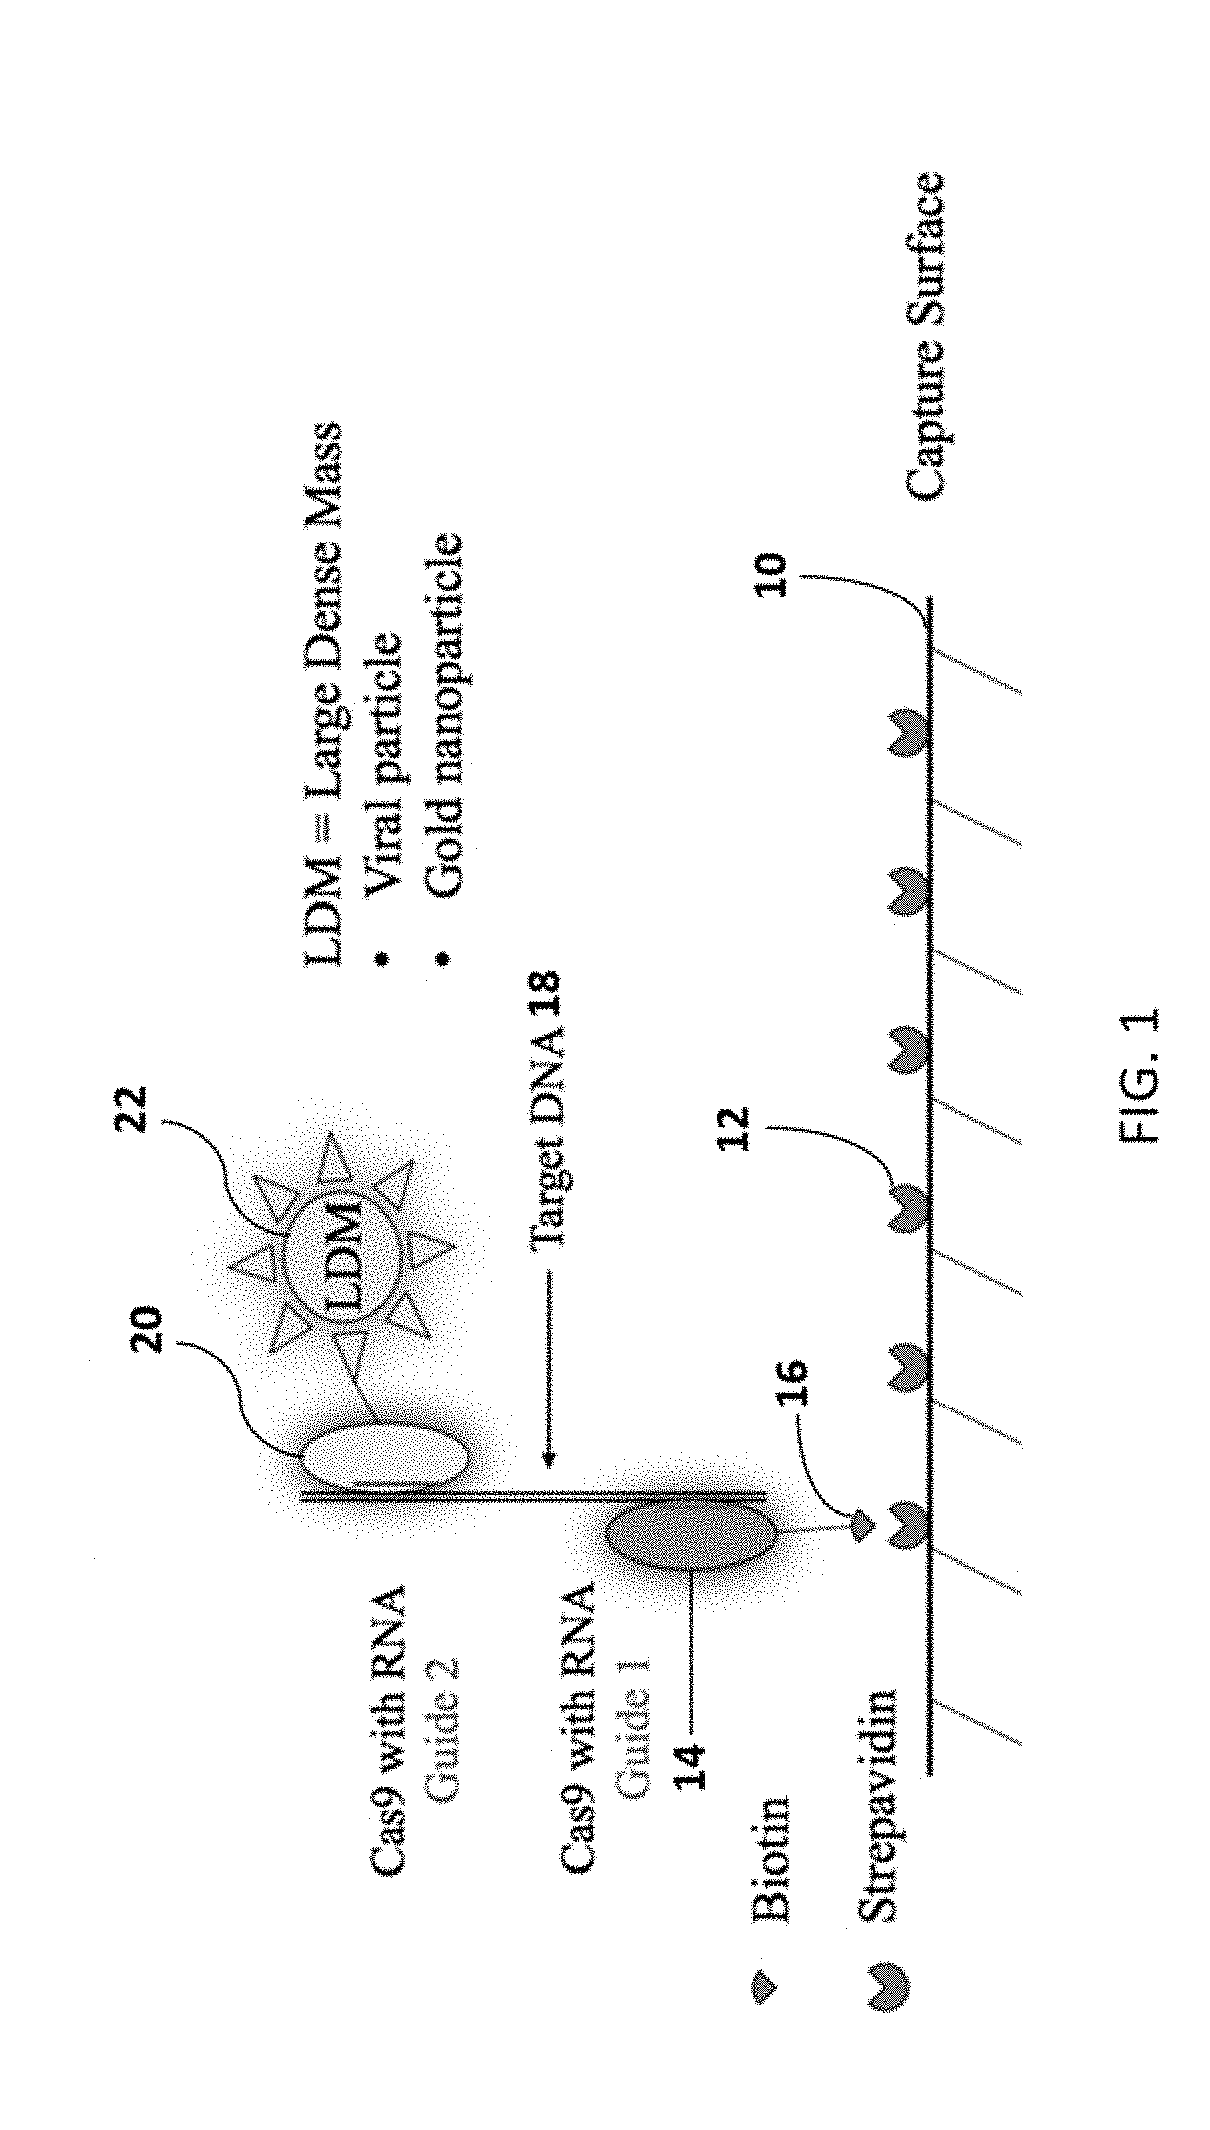 Method for isothermal DNA detection using a modified crispr/cas system and the  apparatus for detection by surface  acoustic waves for gene editing